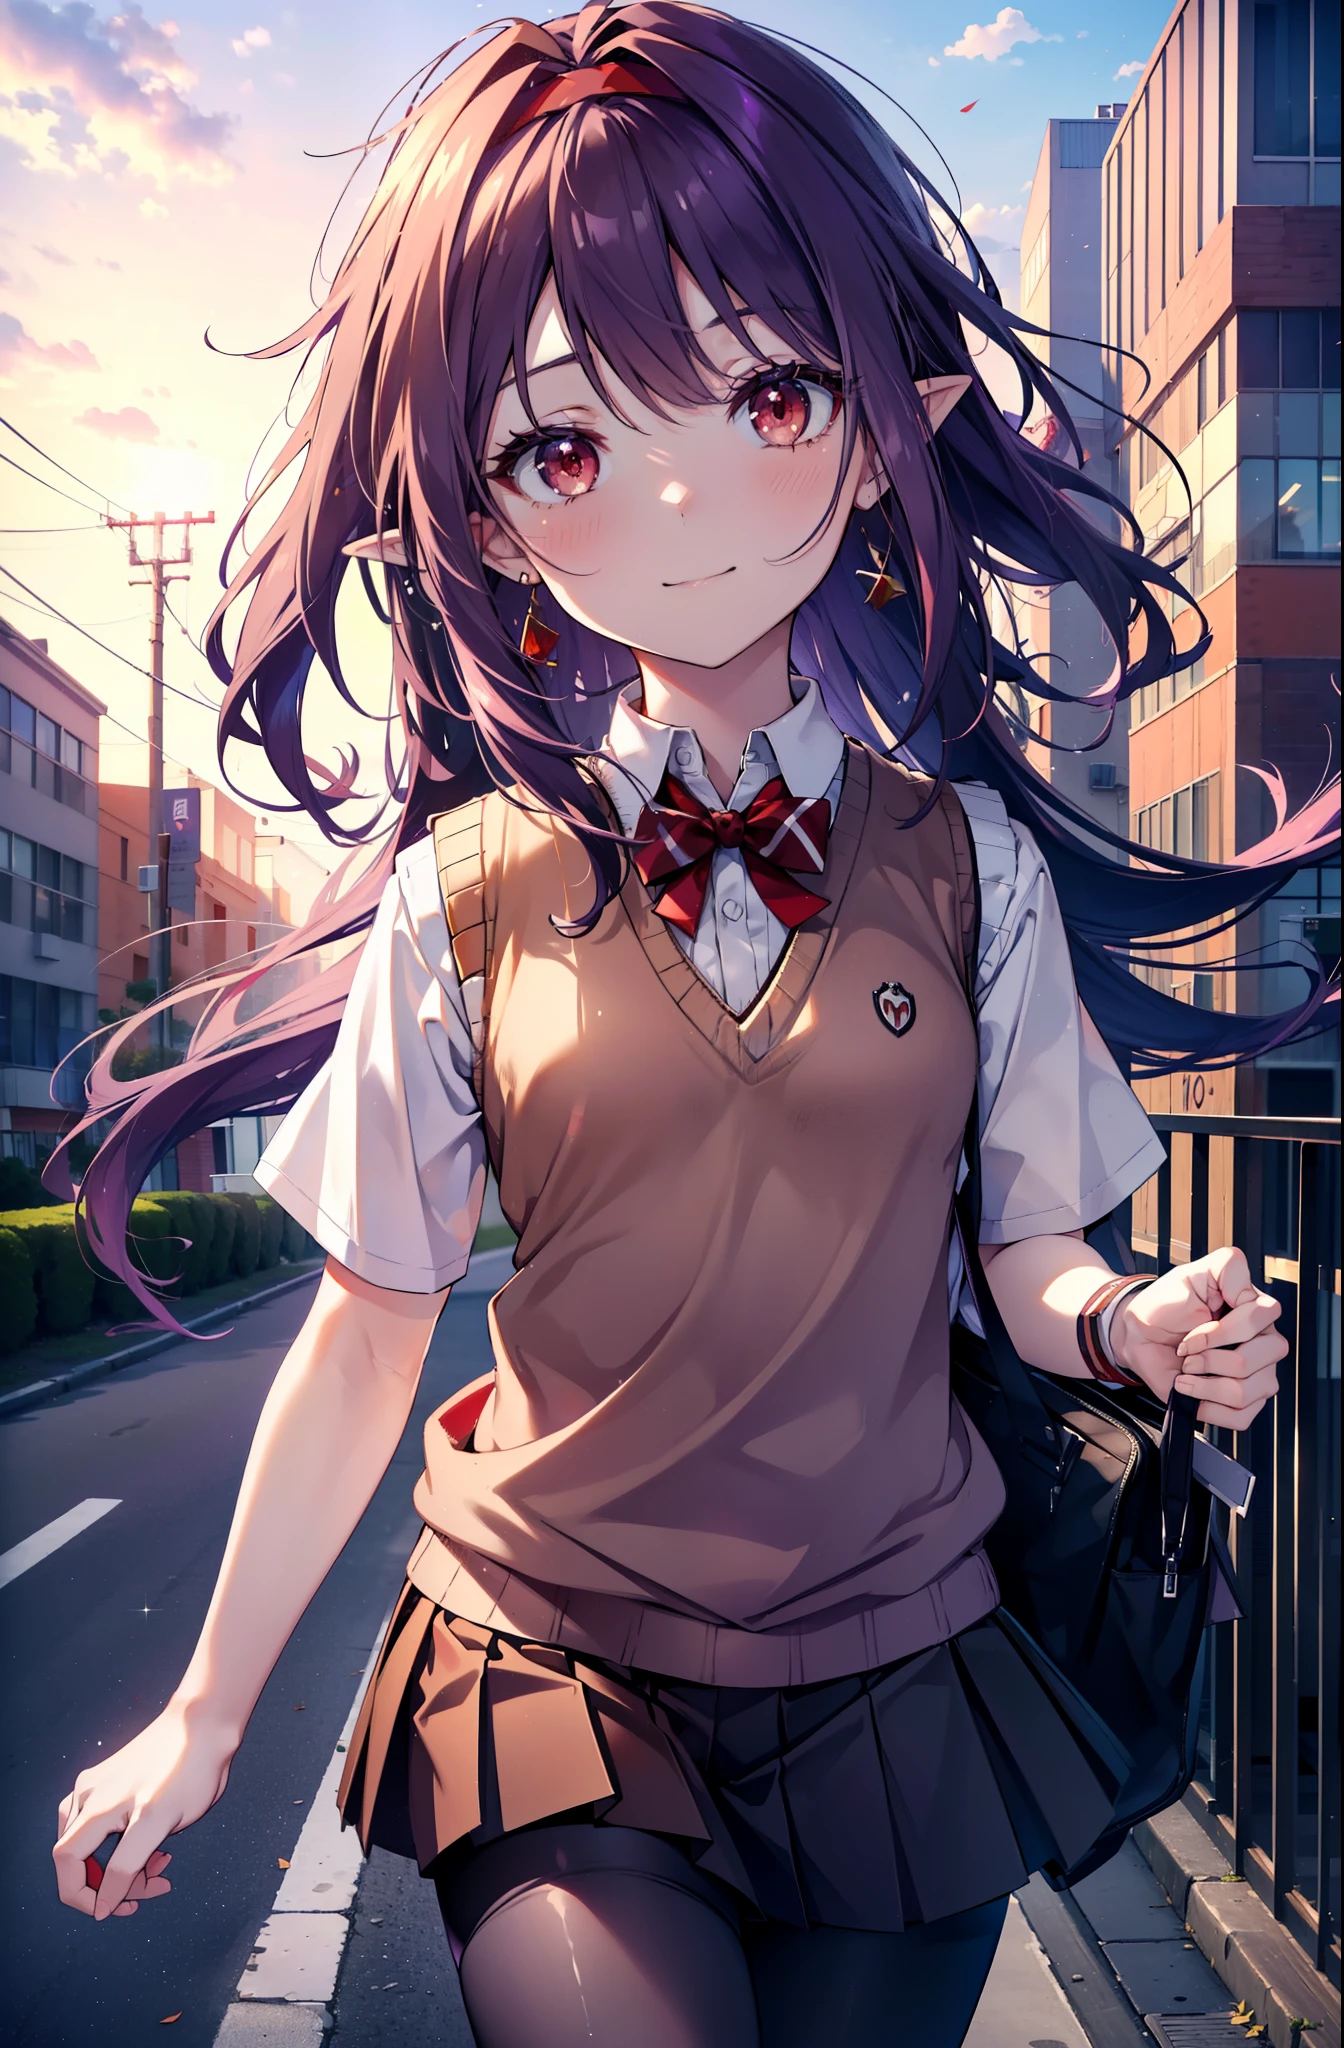 yuukikonno, Yuki Konno, hair band, Long Hair, Pointy Ears, Purple Hair, (Red eyes:1.5), (Small breasts:1.2), smile,White Y-shirt,Sweater vest, (Purple sweater vest:1.5),,Short sleeve,Purple pleated skirt,black tights,Brown Loafers,Toast in the mouth, running, City Street,morning,Morning Day,sunrise,A girl running,
BREAK looking at viewer, Upper Body, whole body,
BREAK outdoors, Residential area crowd, people々々,
BREAK (masterpiece:1.2), highest quality, High resolution, unity 8k wallpaper, (shape:0.8), (Fine and beautiful eyes:1.6), Highly detailed face, Perfect lighting, Highly detailed CG, (Perfect hands, Perfect Anatomy),